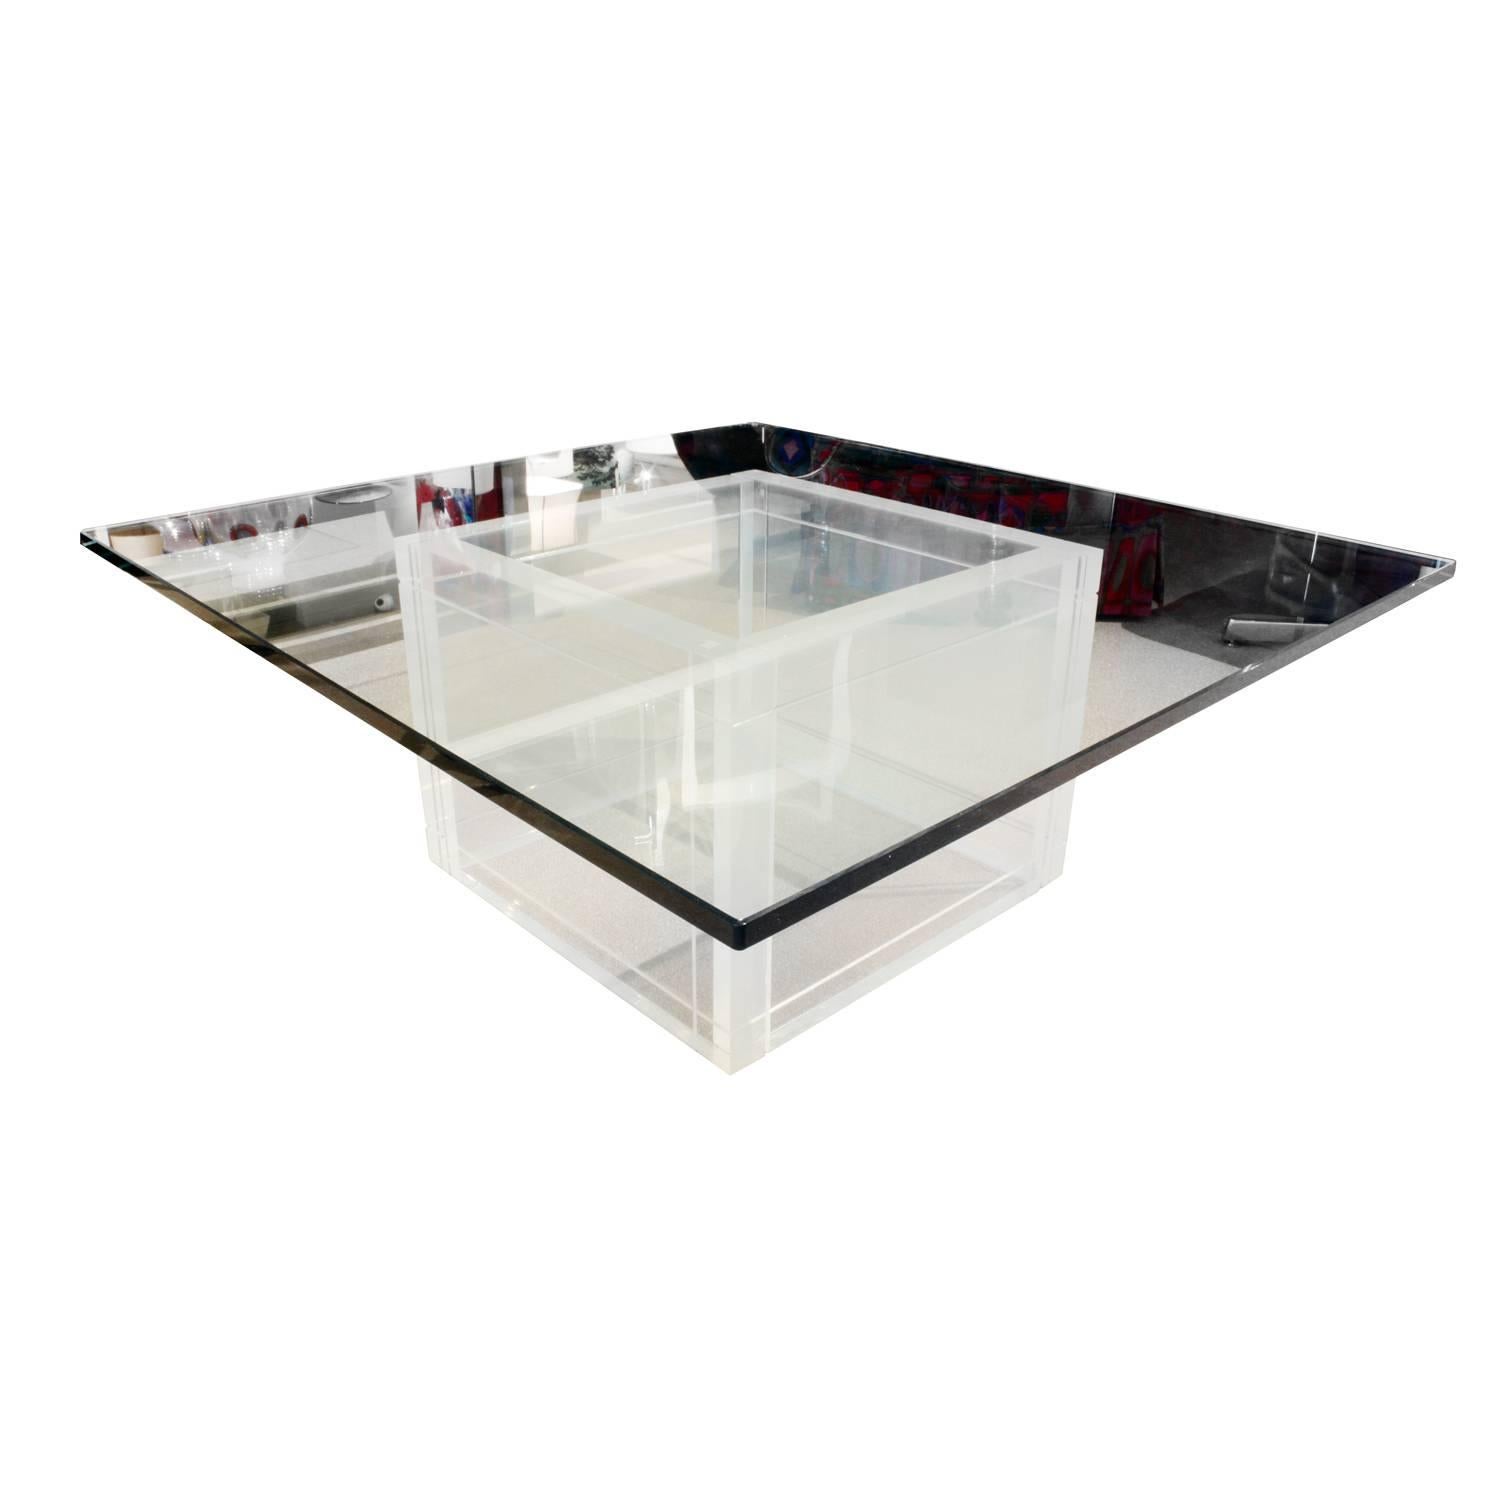 Coffee table with thick Lucite square base with thick glass top, American, 1970s. This is a chic design.